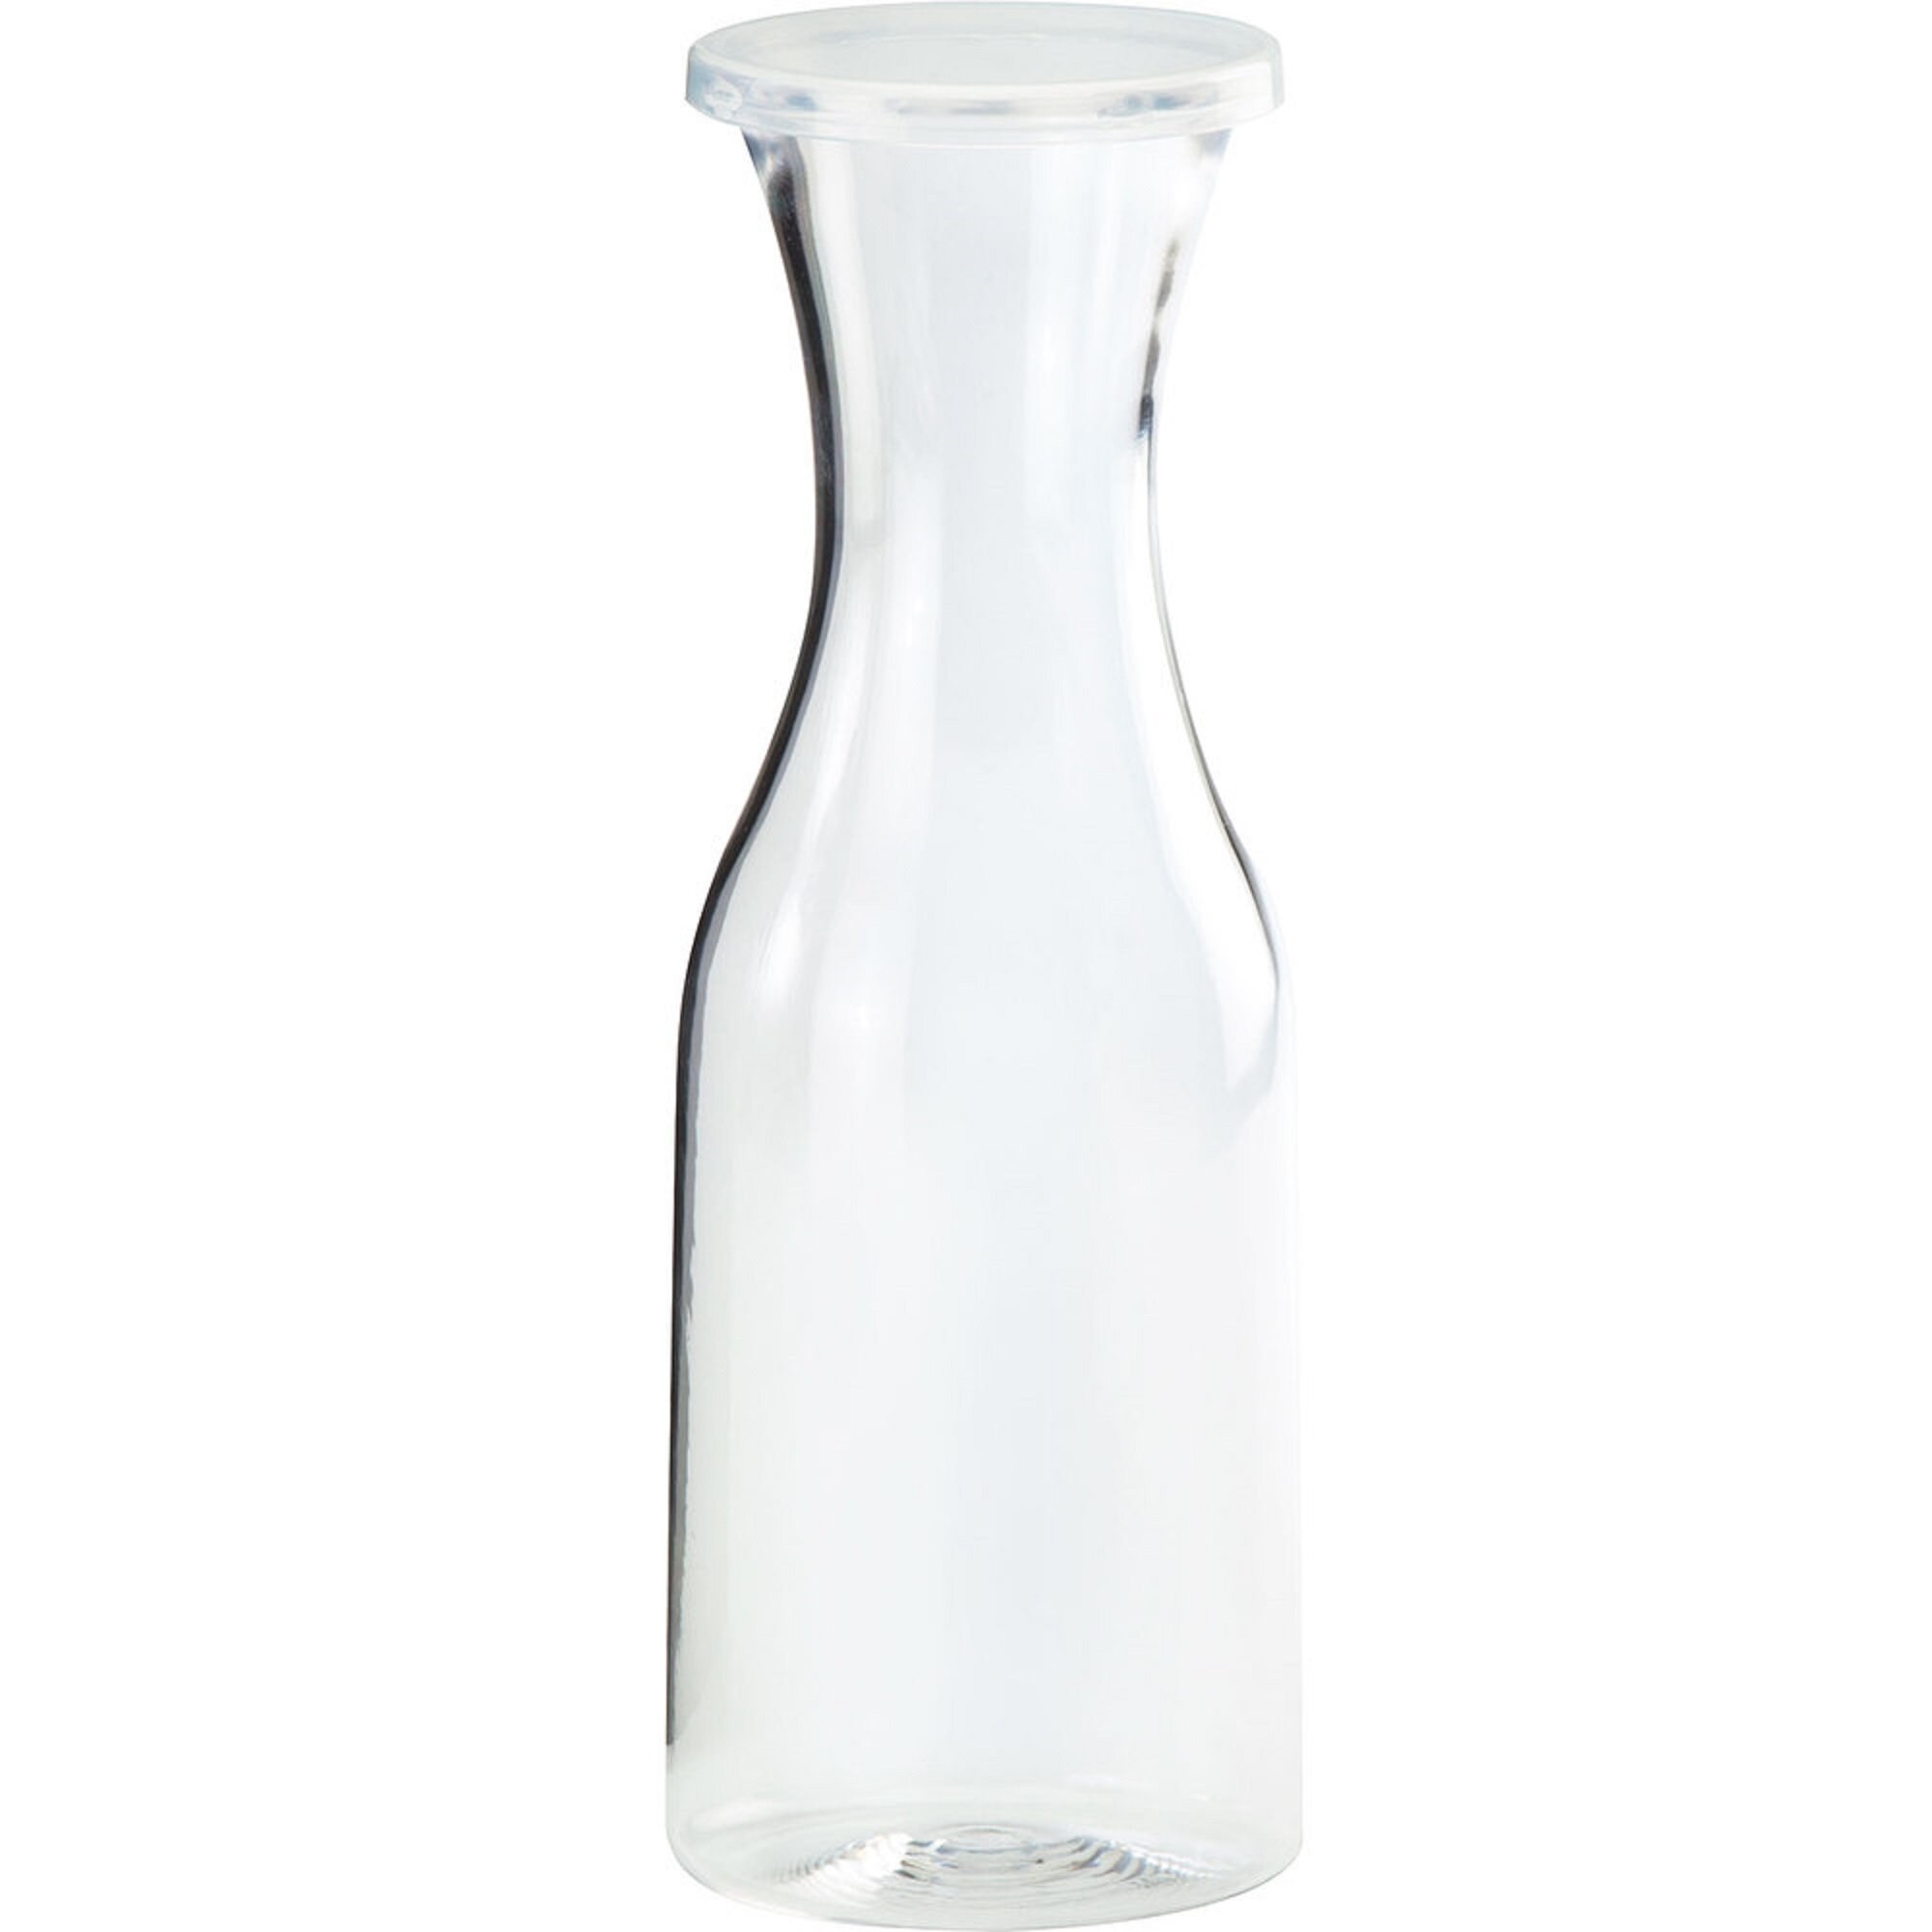 PRESTIGE Mimosa Bar Kit - Glass Carafe with Lids Indonesia